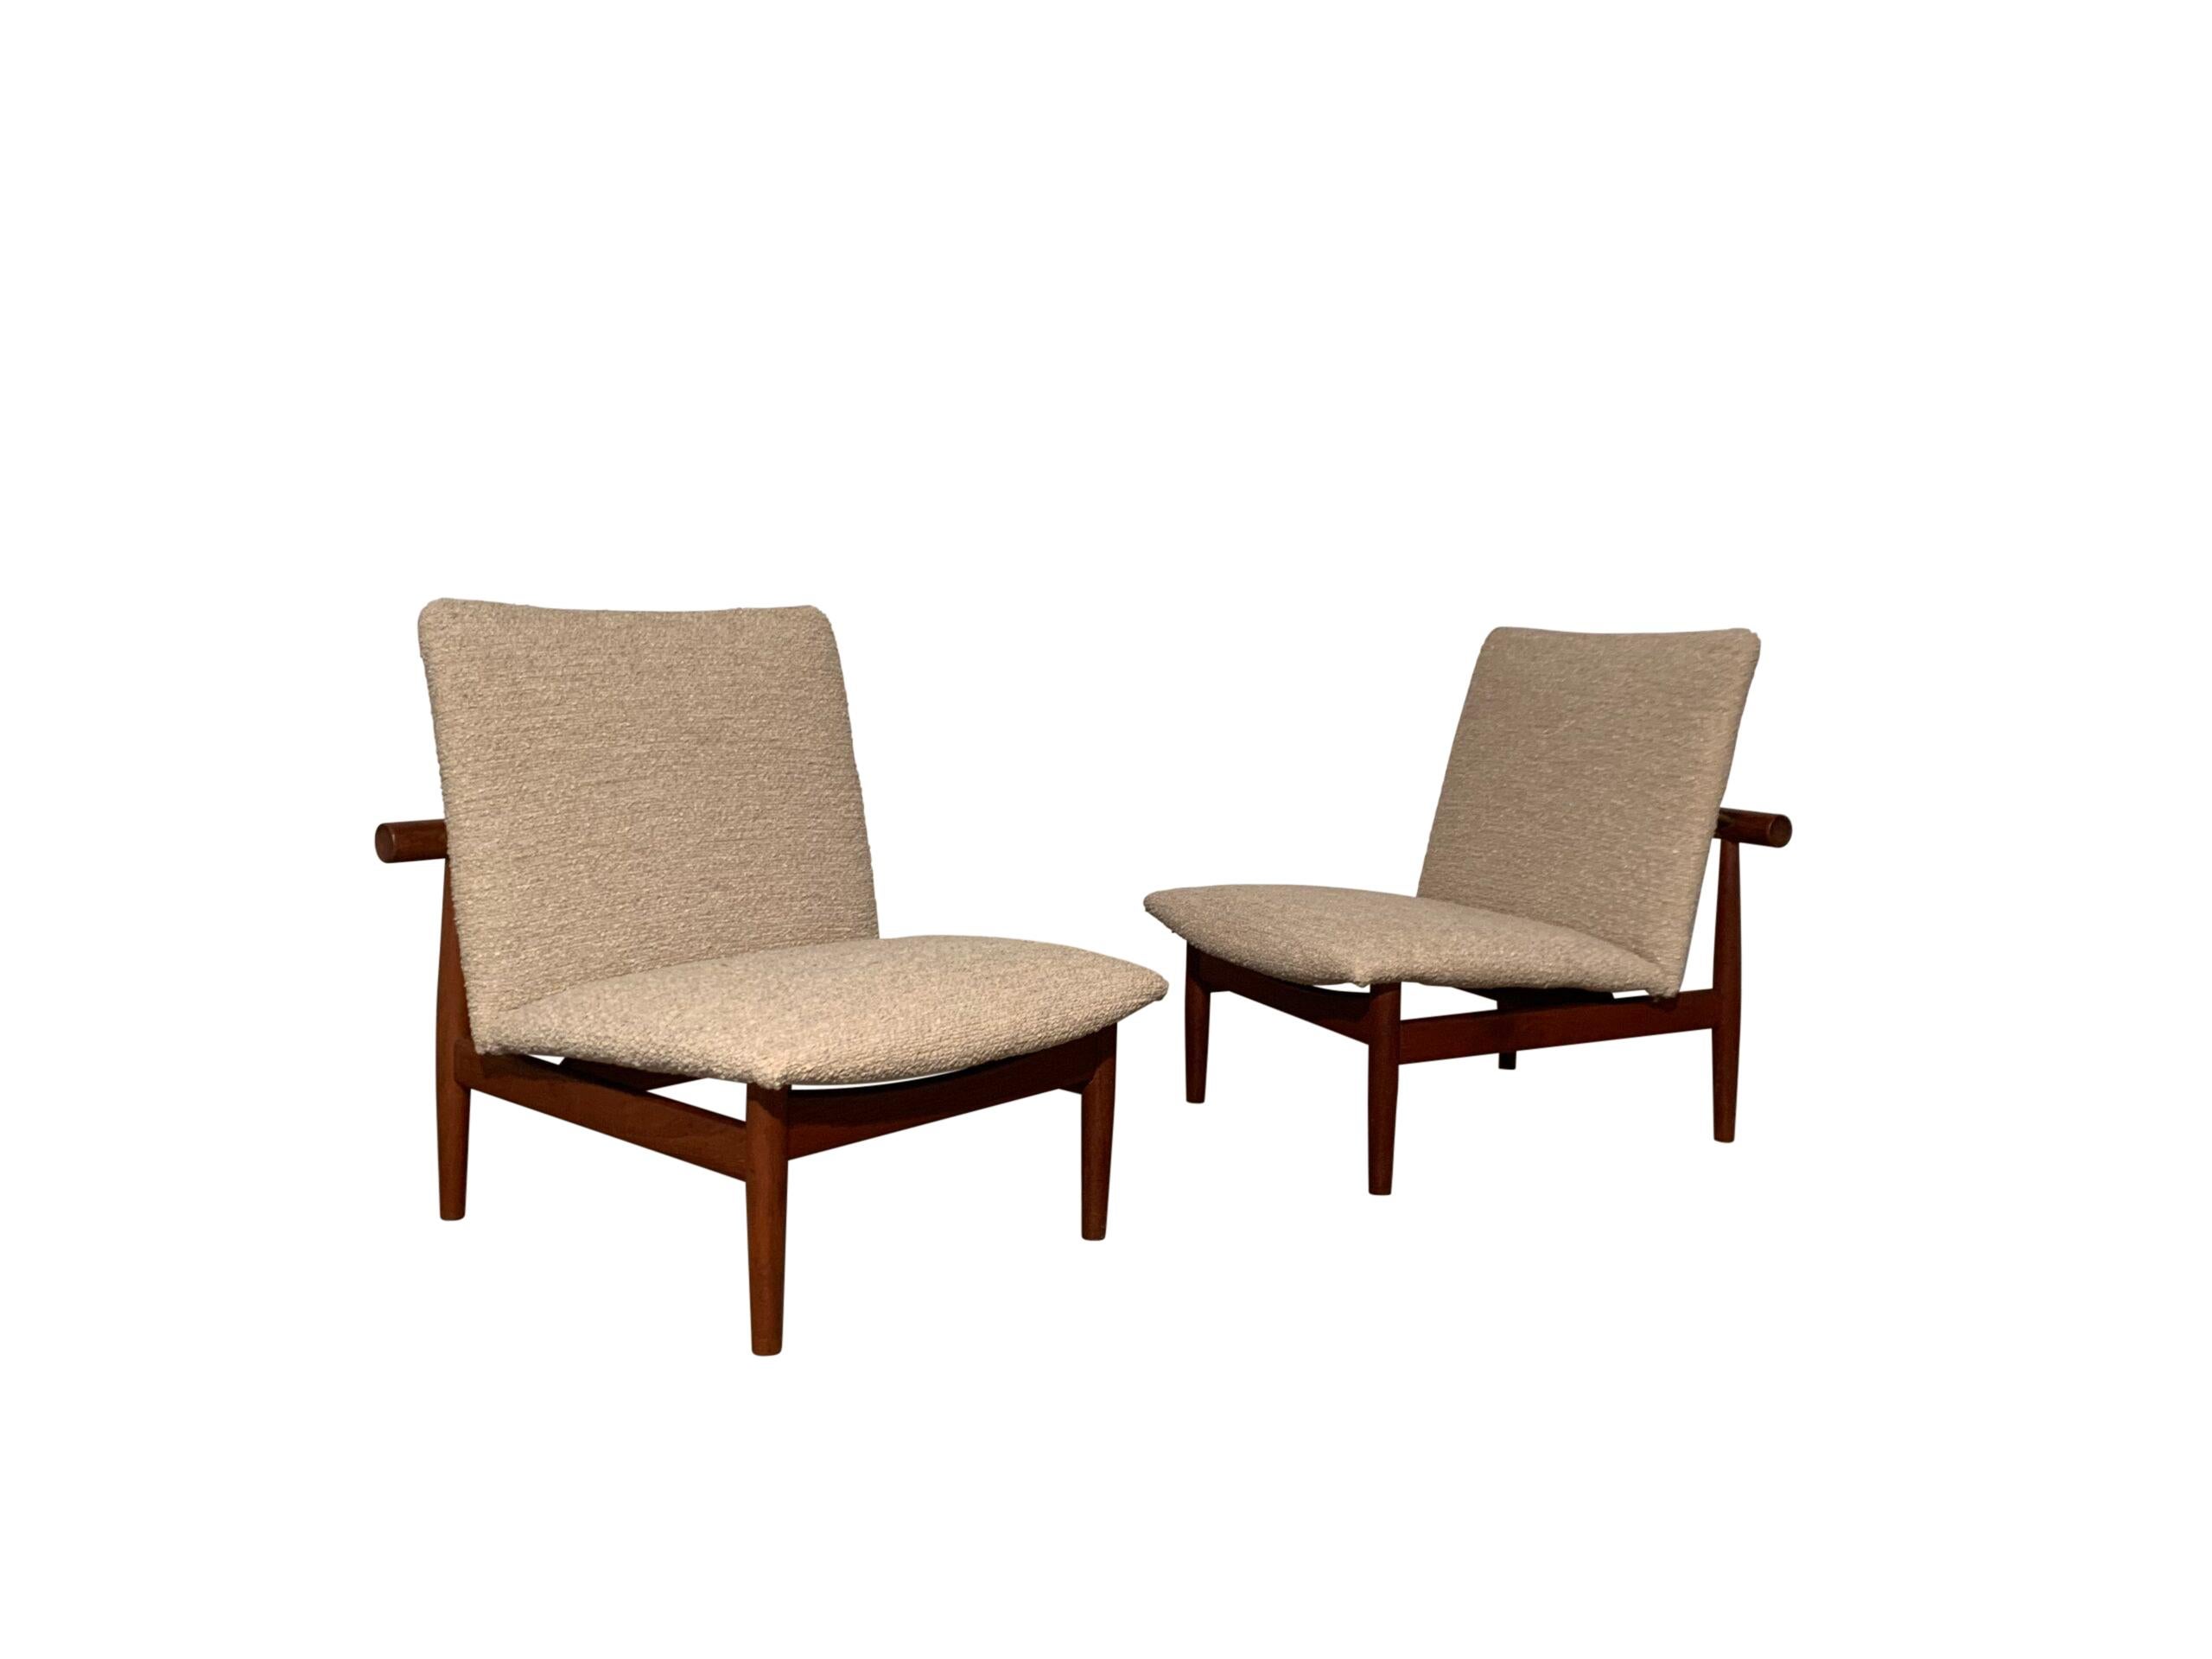 This pair of lounge chairs, ‘model 137’ designed in 1957 and manufacturerd by furniture manufacturers France & Son. The Japan serie takes inspiration from traditional Japanese building techniques. Defined by a visible, solid horizontal backrest,